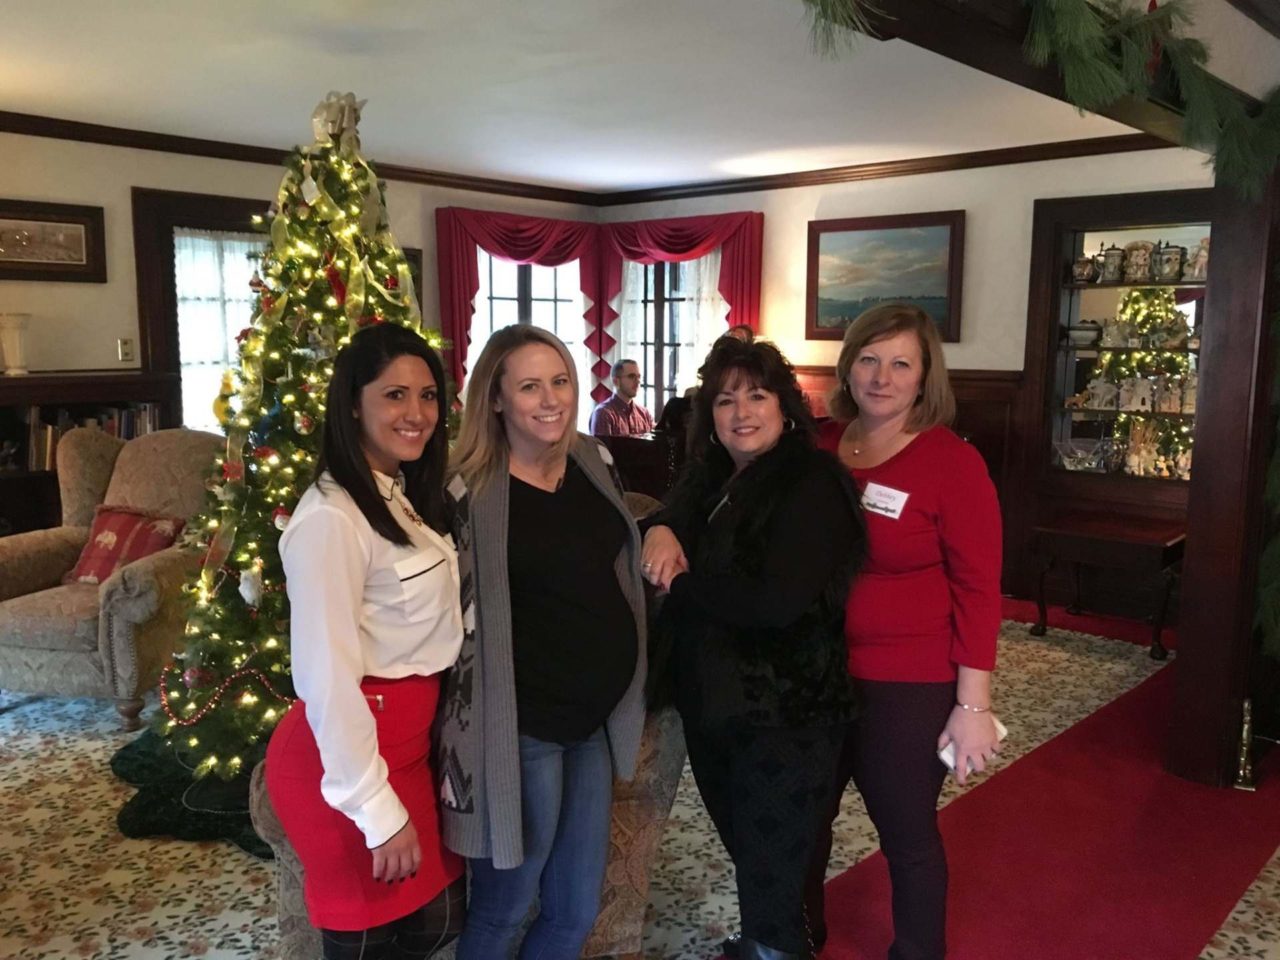 Cranford Woman’s Club Home for the Holidays House Tour, Cranford Woman’s Club Home for the Holidays House Tour 2019